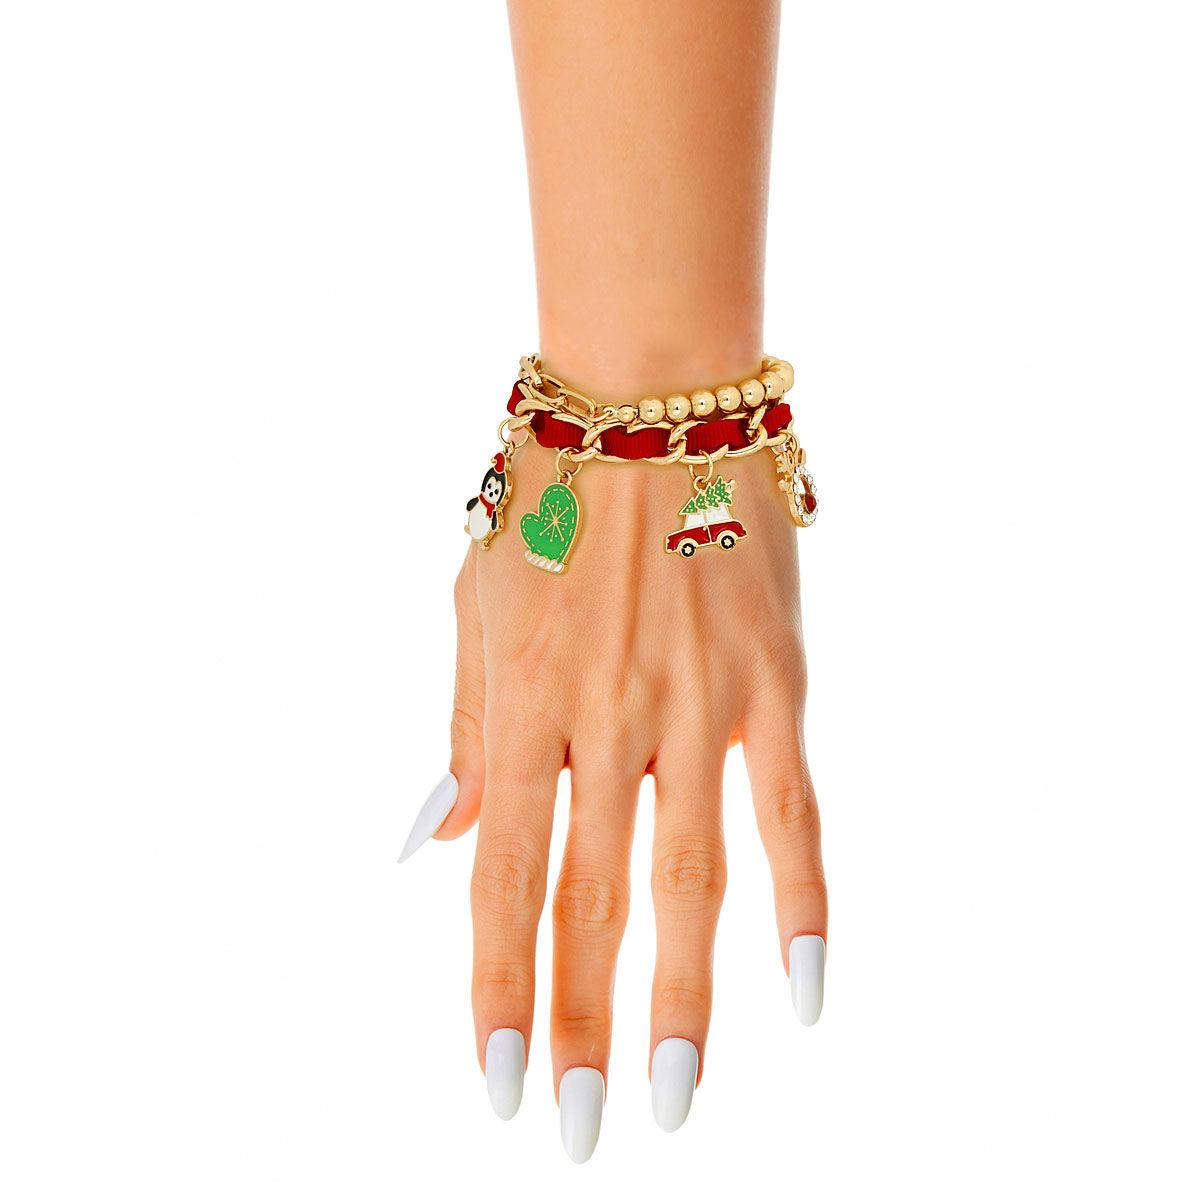 Deck the Halls with Our Festive Red Christmas Charms Bracelet Set - Order Today